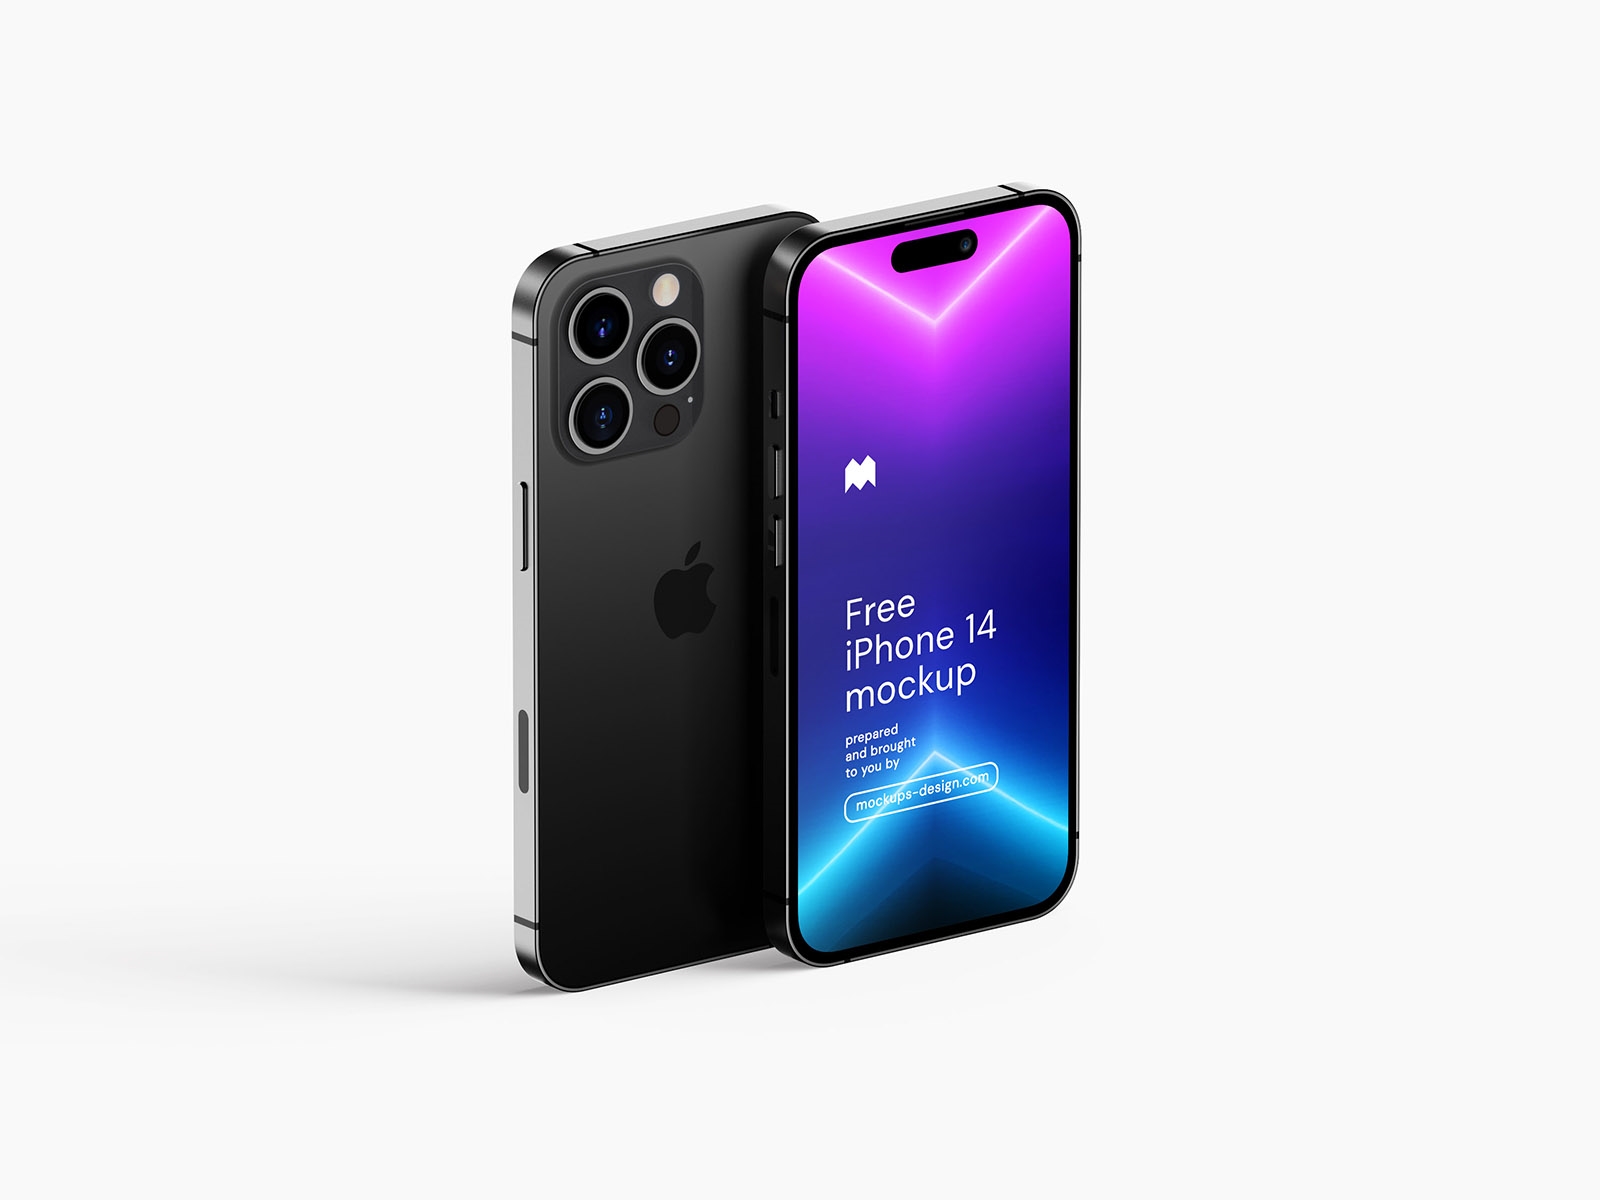 Perspective and Front View of 5 iPhone 14 Mockup FREE PSD